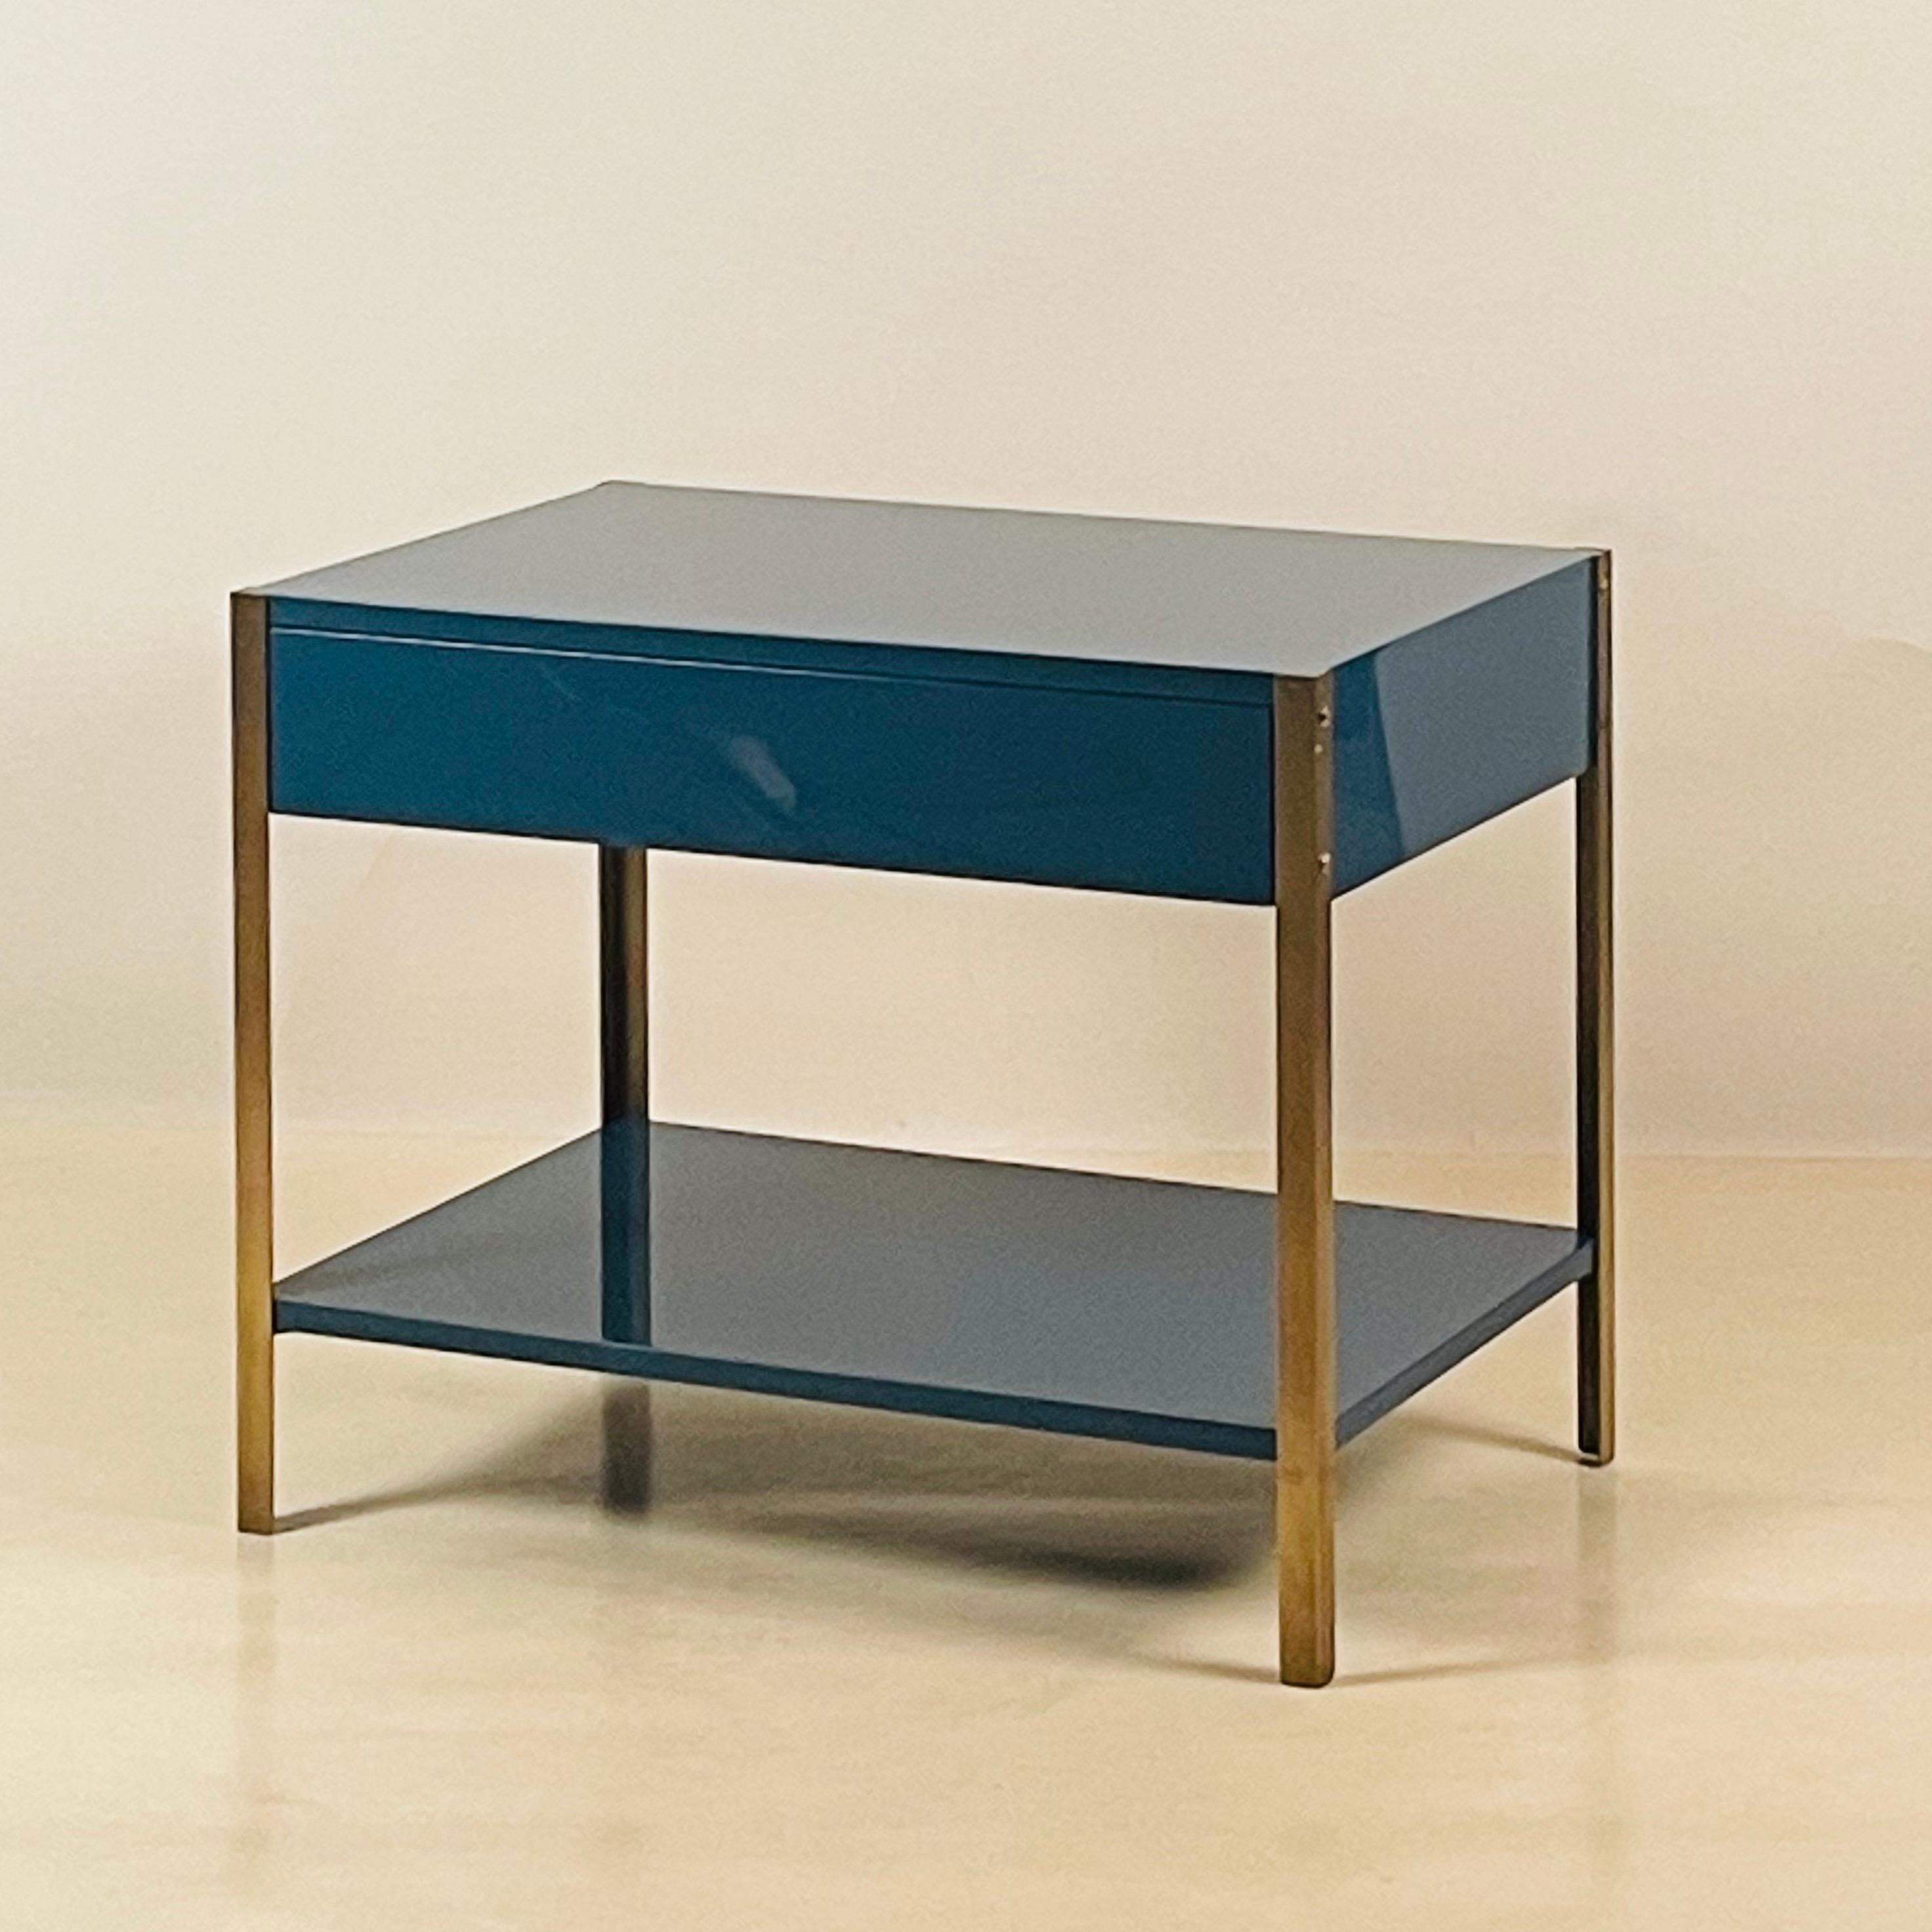 French Pair of 'Laque' Custom Lacquer and Brushed Brass Nightstands by Design Frères For Sale